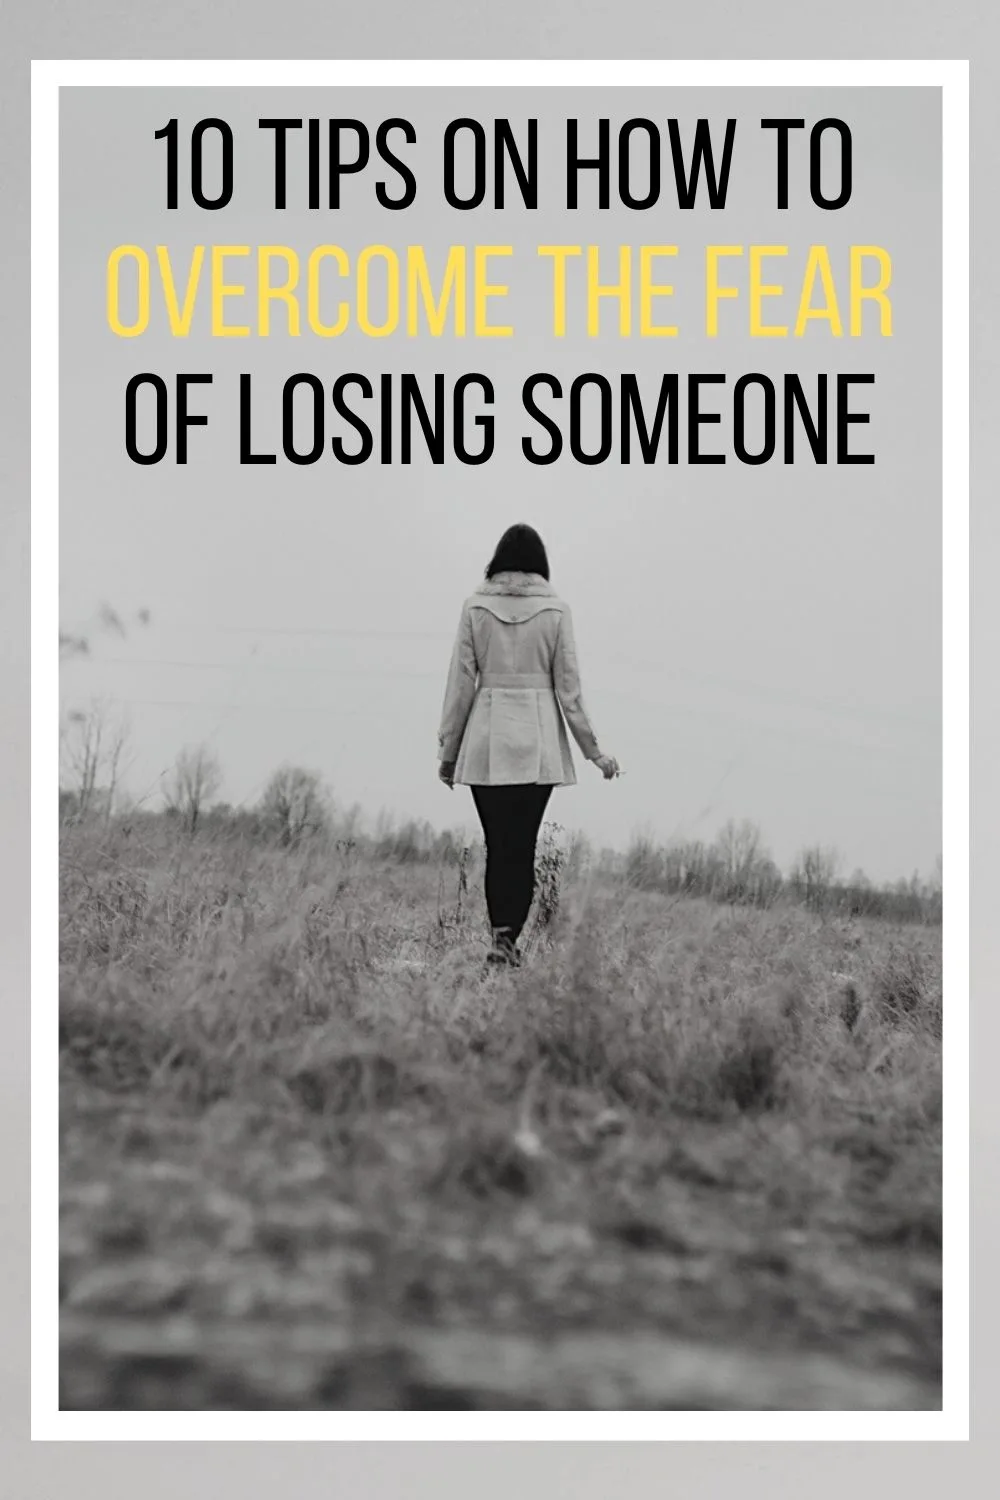 10 Tips On How To Overcome The Fear Of Losing Someone